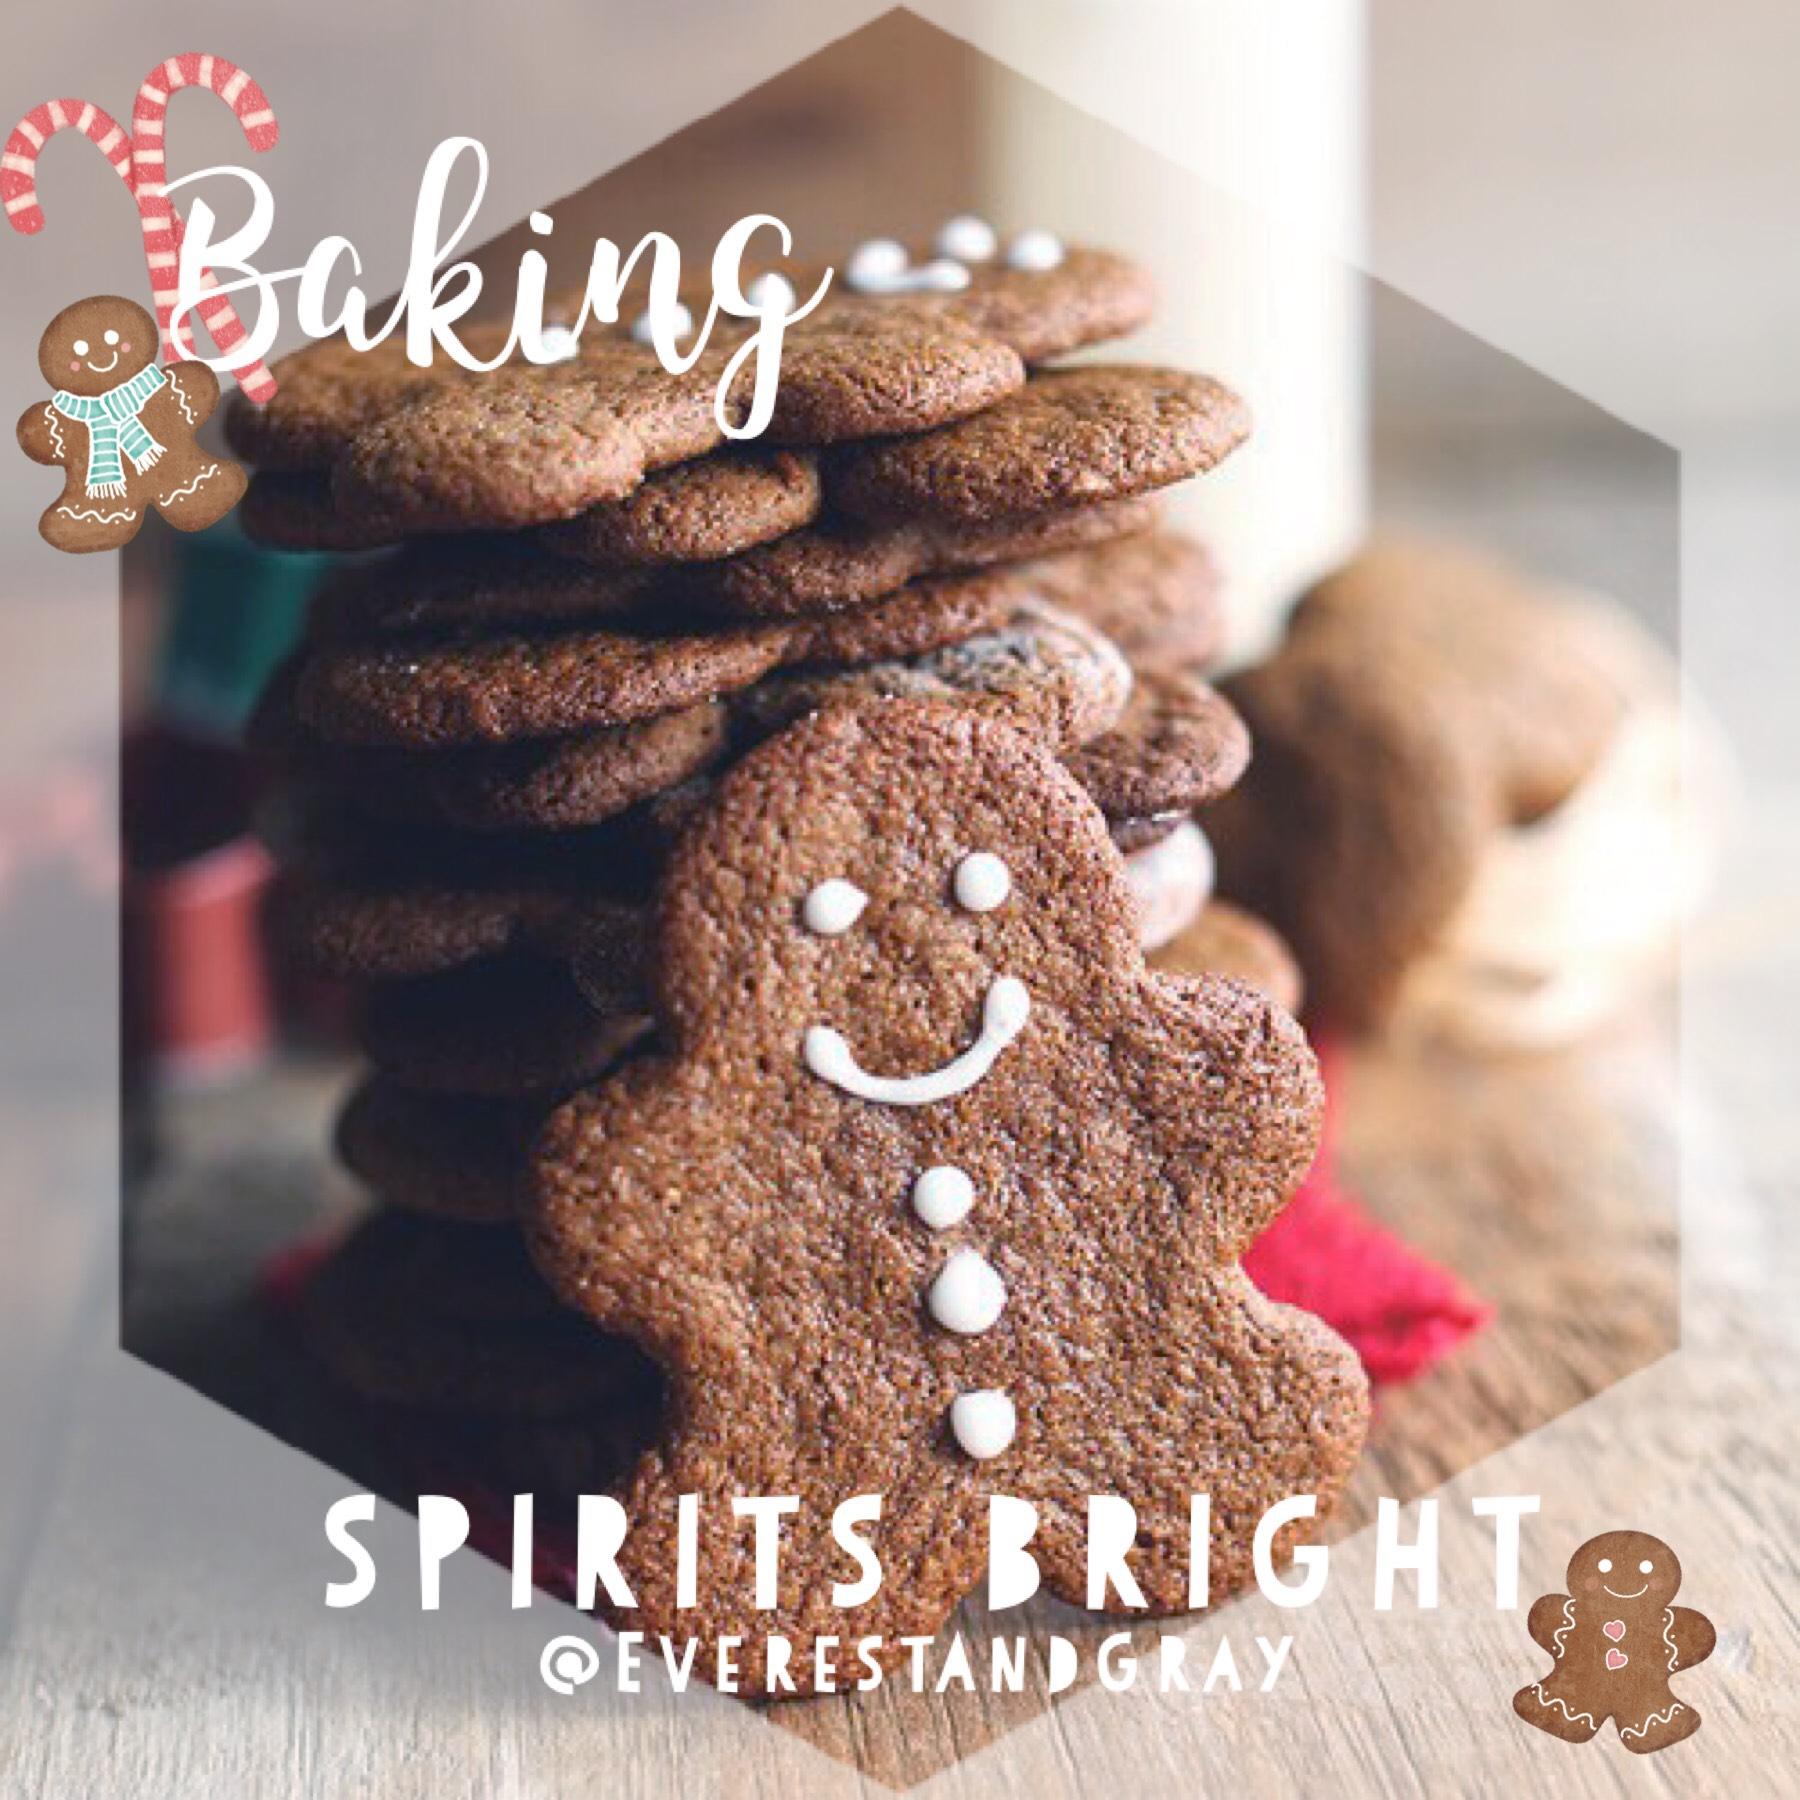 🌲♥️Baking Spirits Bright! What are your favorite Christmas cookies?? I love baking gingerbread + PB Blossoms! 😊
📷: #HollyJollyChristmas stickers  
@piccollage @prisillay 